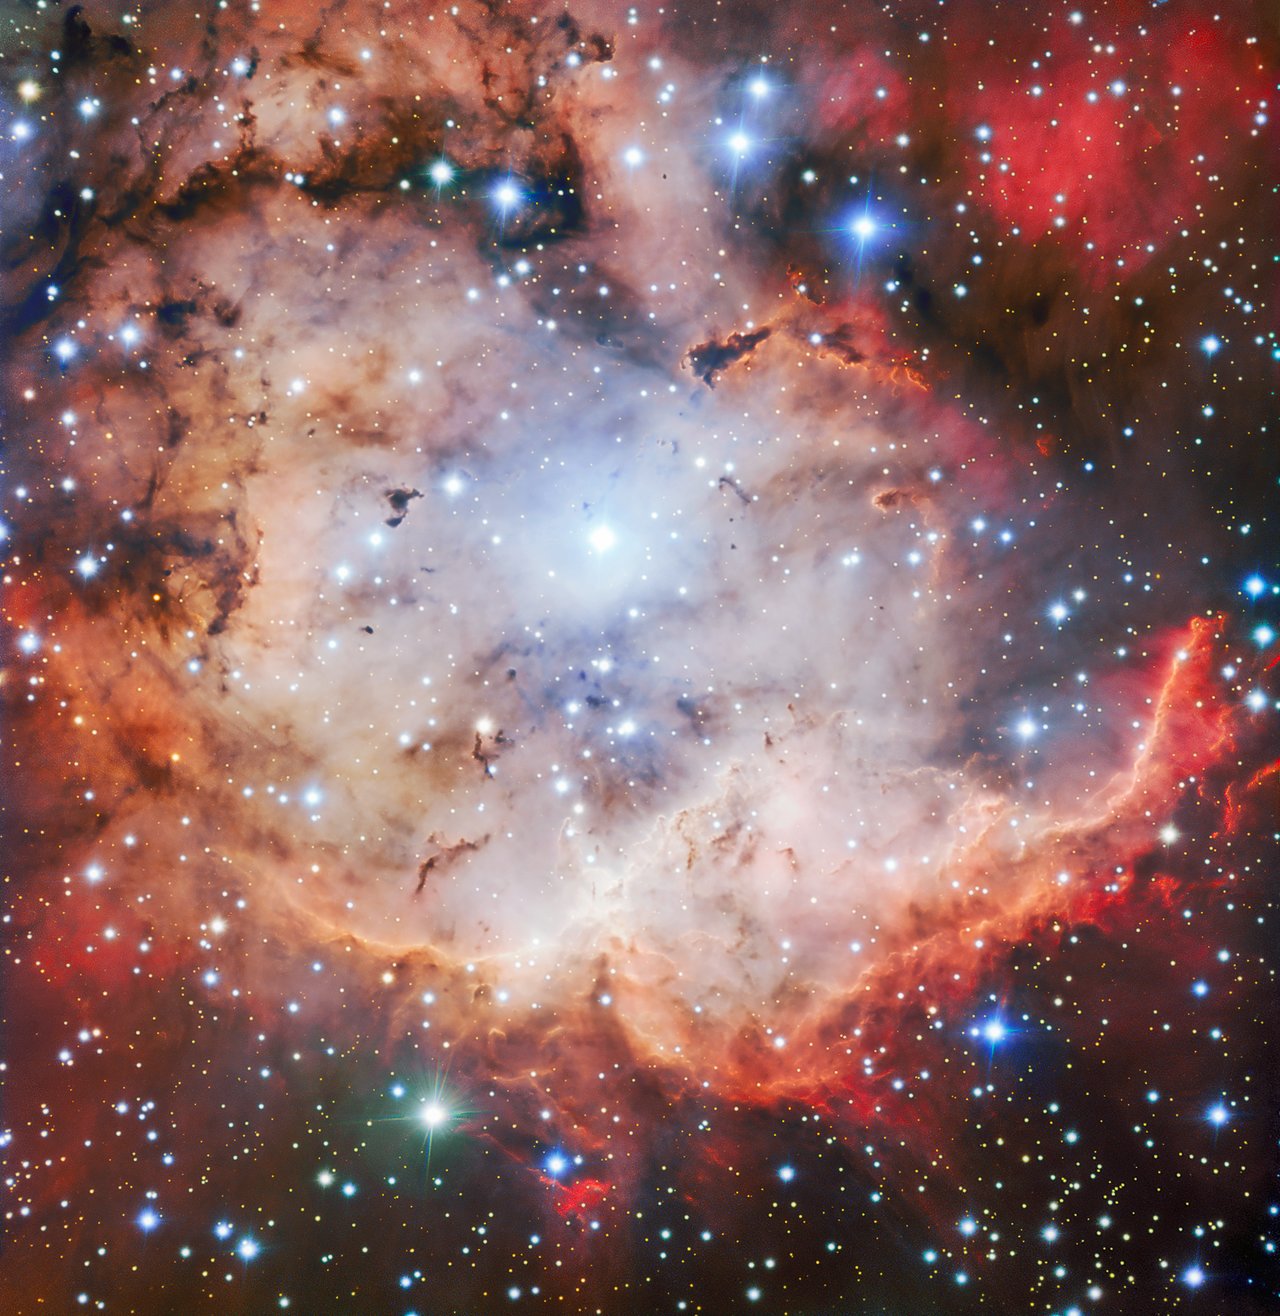 NGC 2467: The Pirate Of The Southern Skies Gets A New Image For Halloween